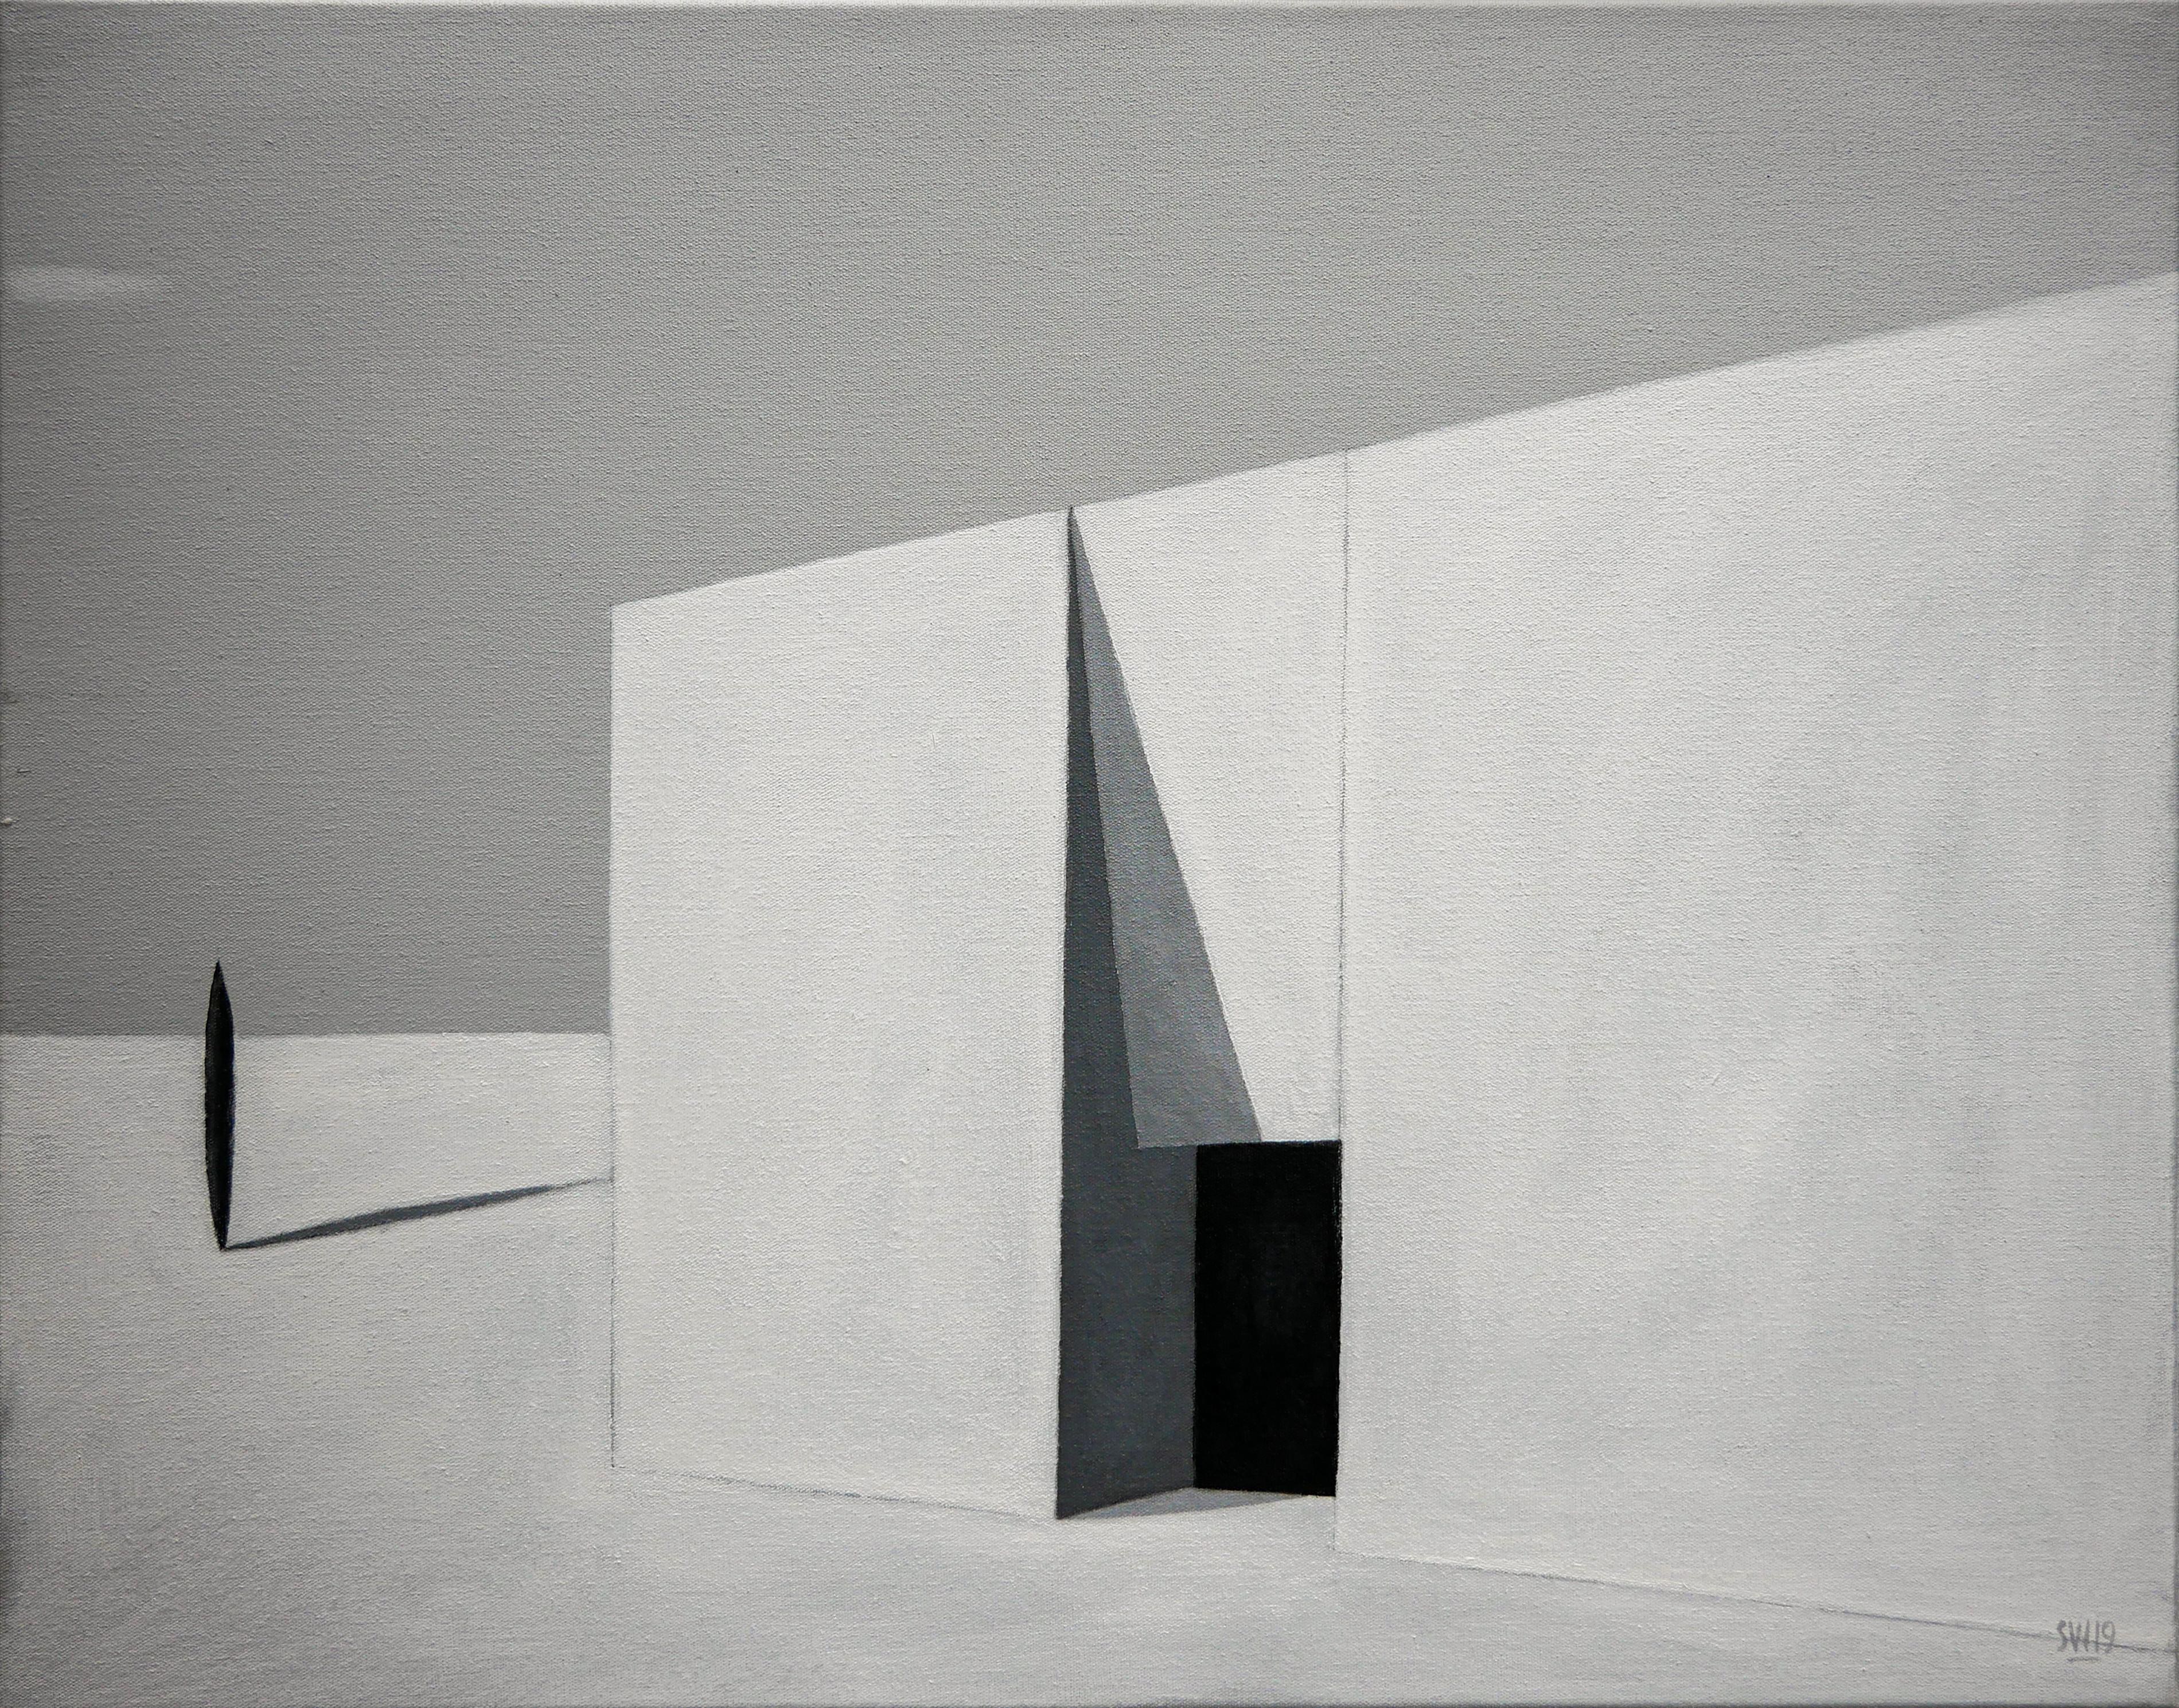 Gray, black, and white abstract contemporary landscape painting by Houston, TX artist Scott Woodard. The painting depicts a surrealist scene with a modernist contemporary architectural structure in the middle of a gray and empty landscape. Signed by